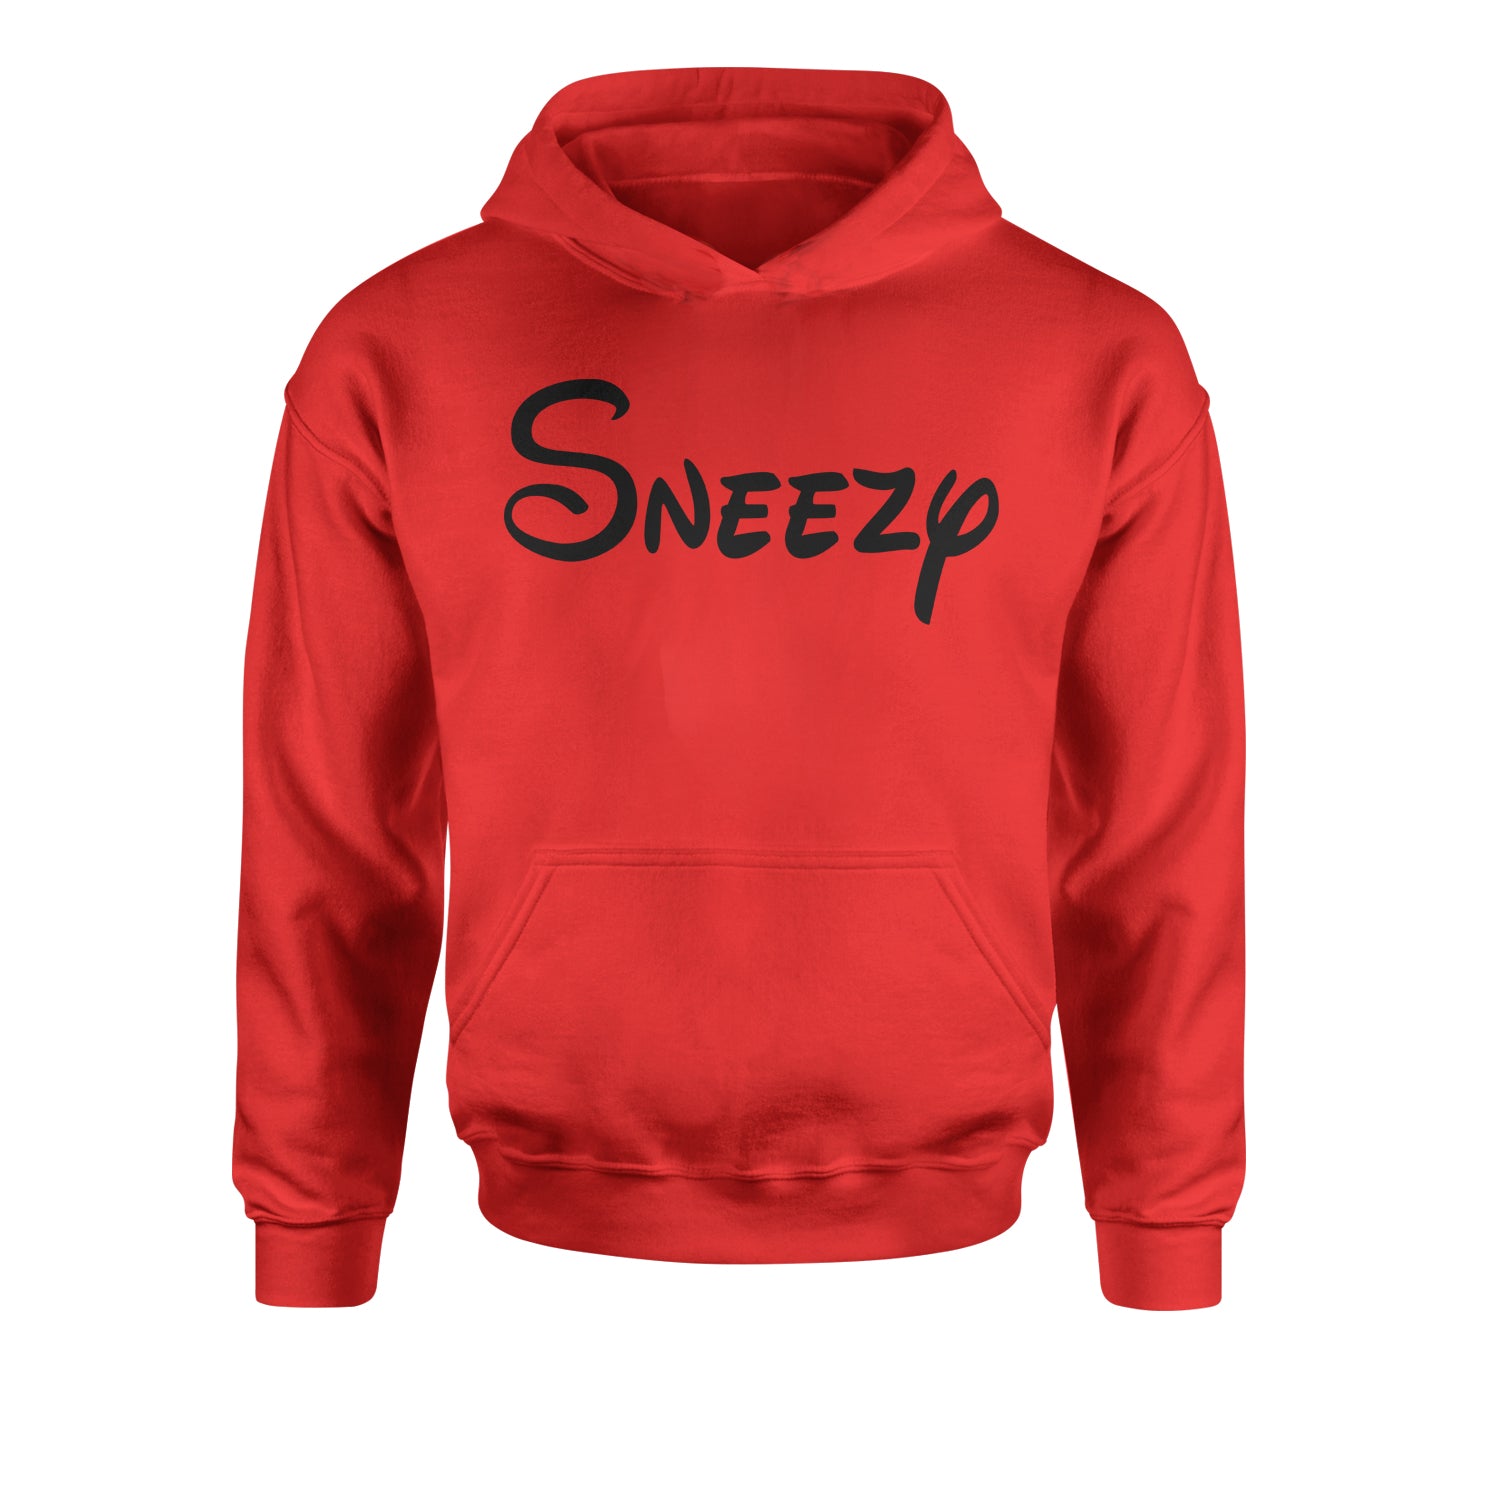 Sneezy - 7 Dwarfs Costume Youth-Sized Hoodie and, costume, dwarfs, group, halloween, matching, seven, snow, the, white by Expression Tees